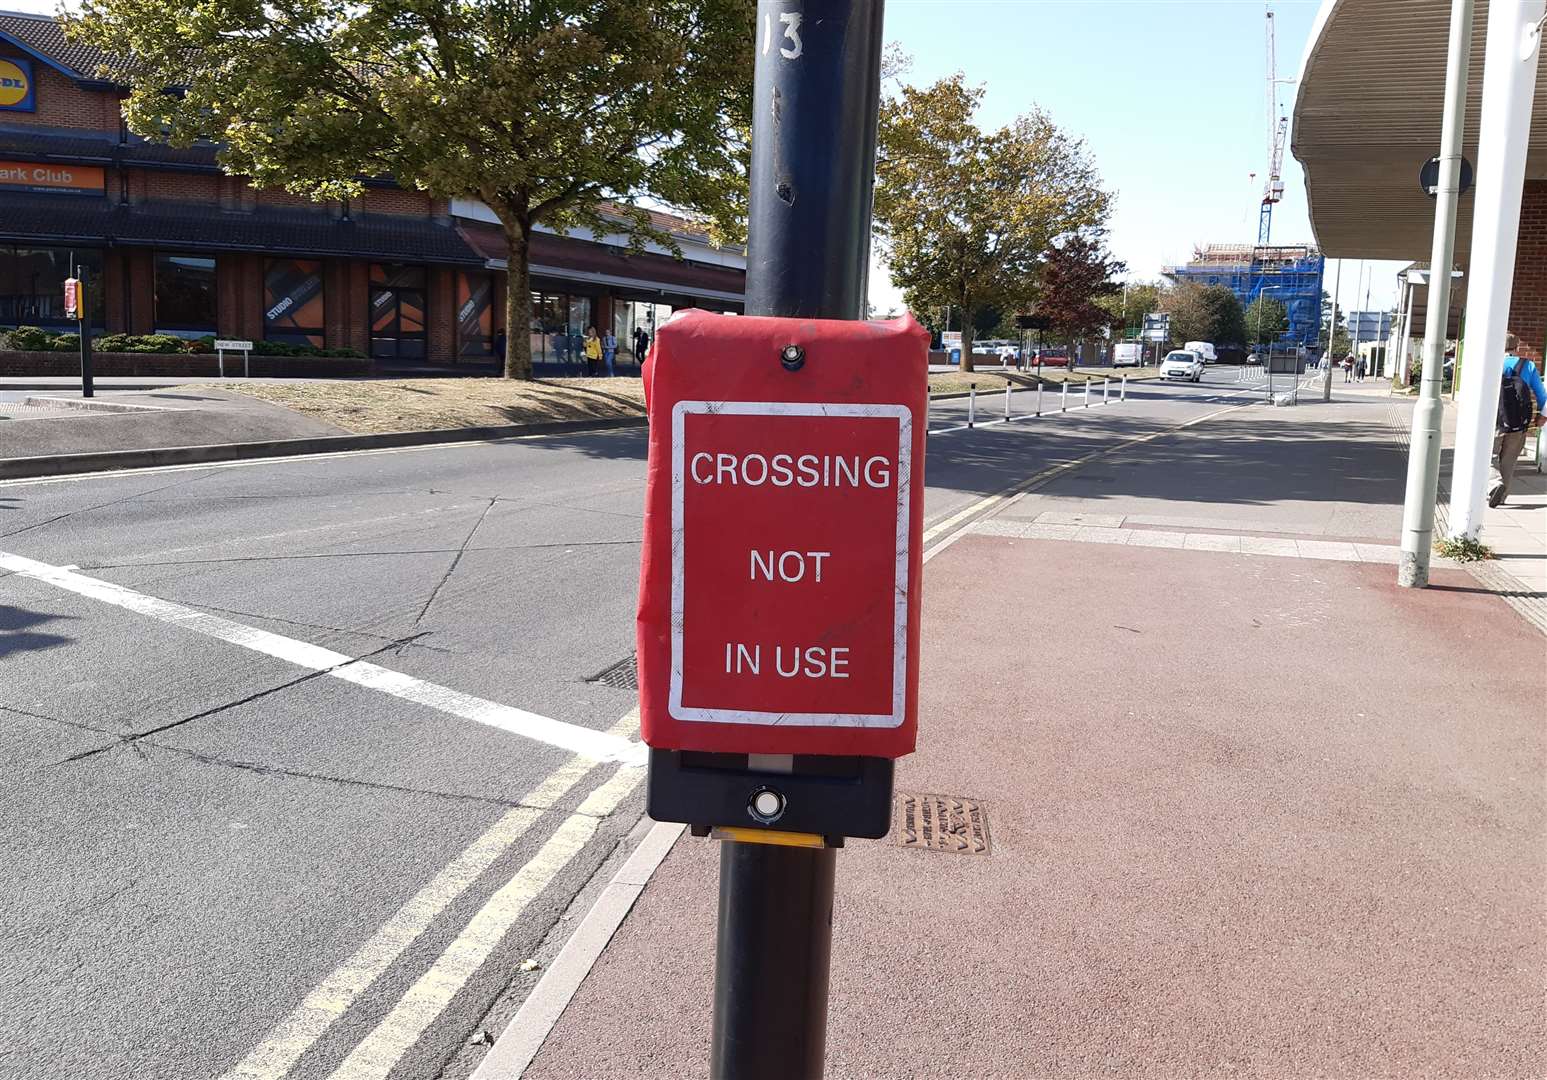 Pedestrian crossings have been de-activated as part of the trial, sparking concerns